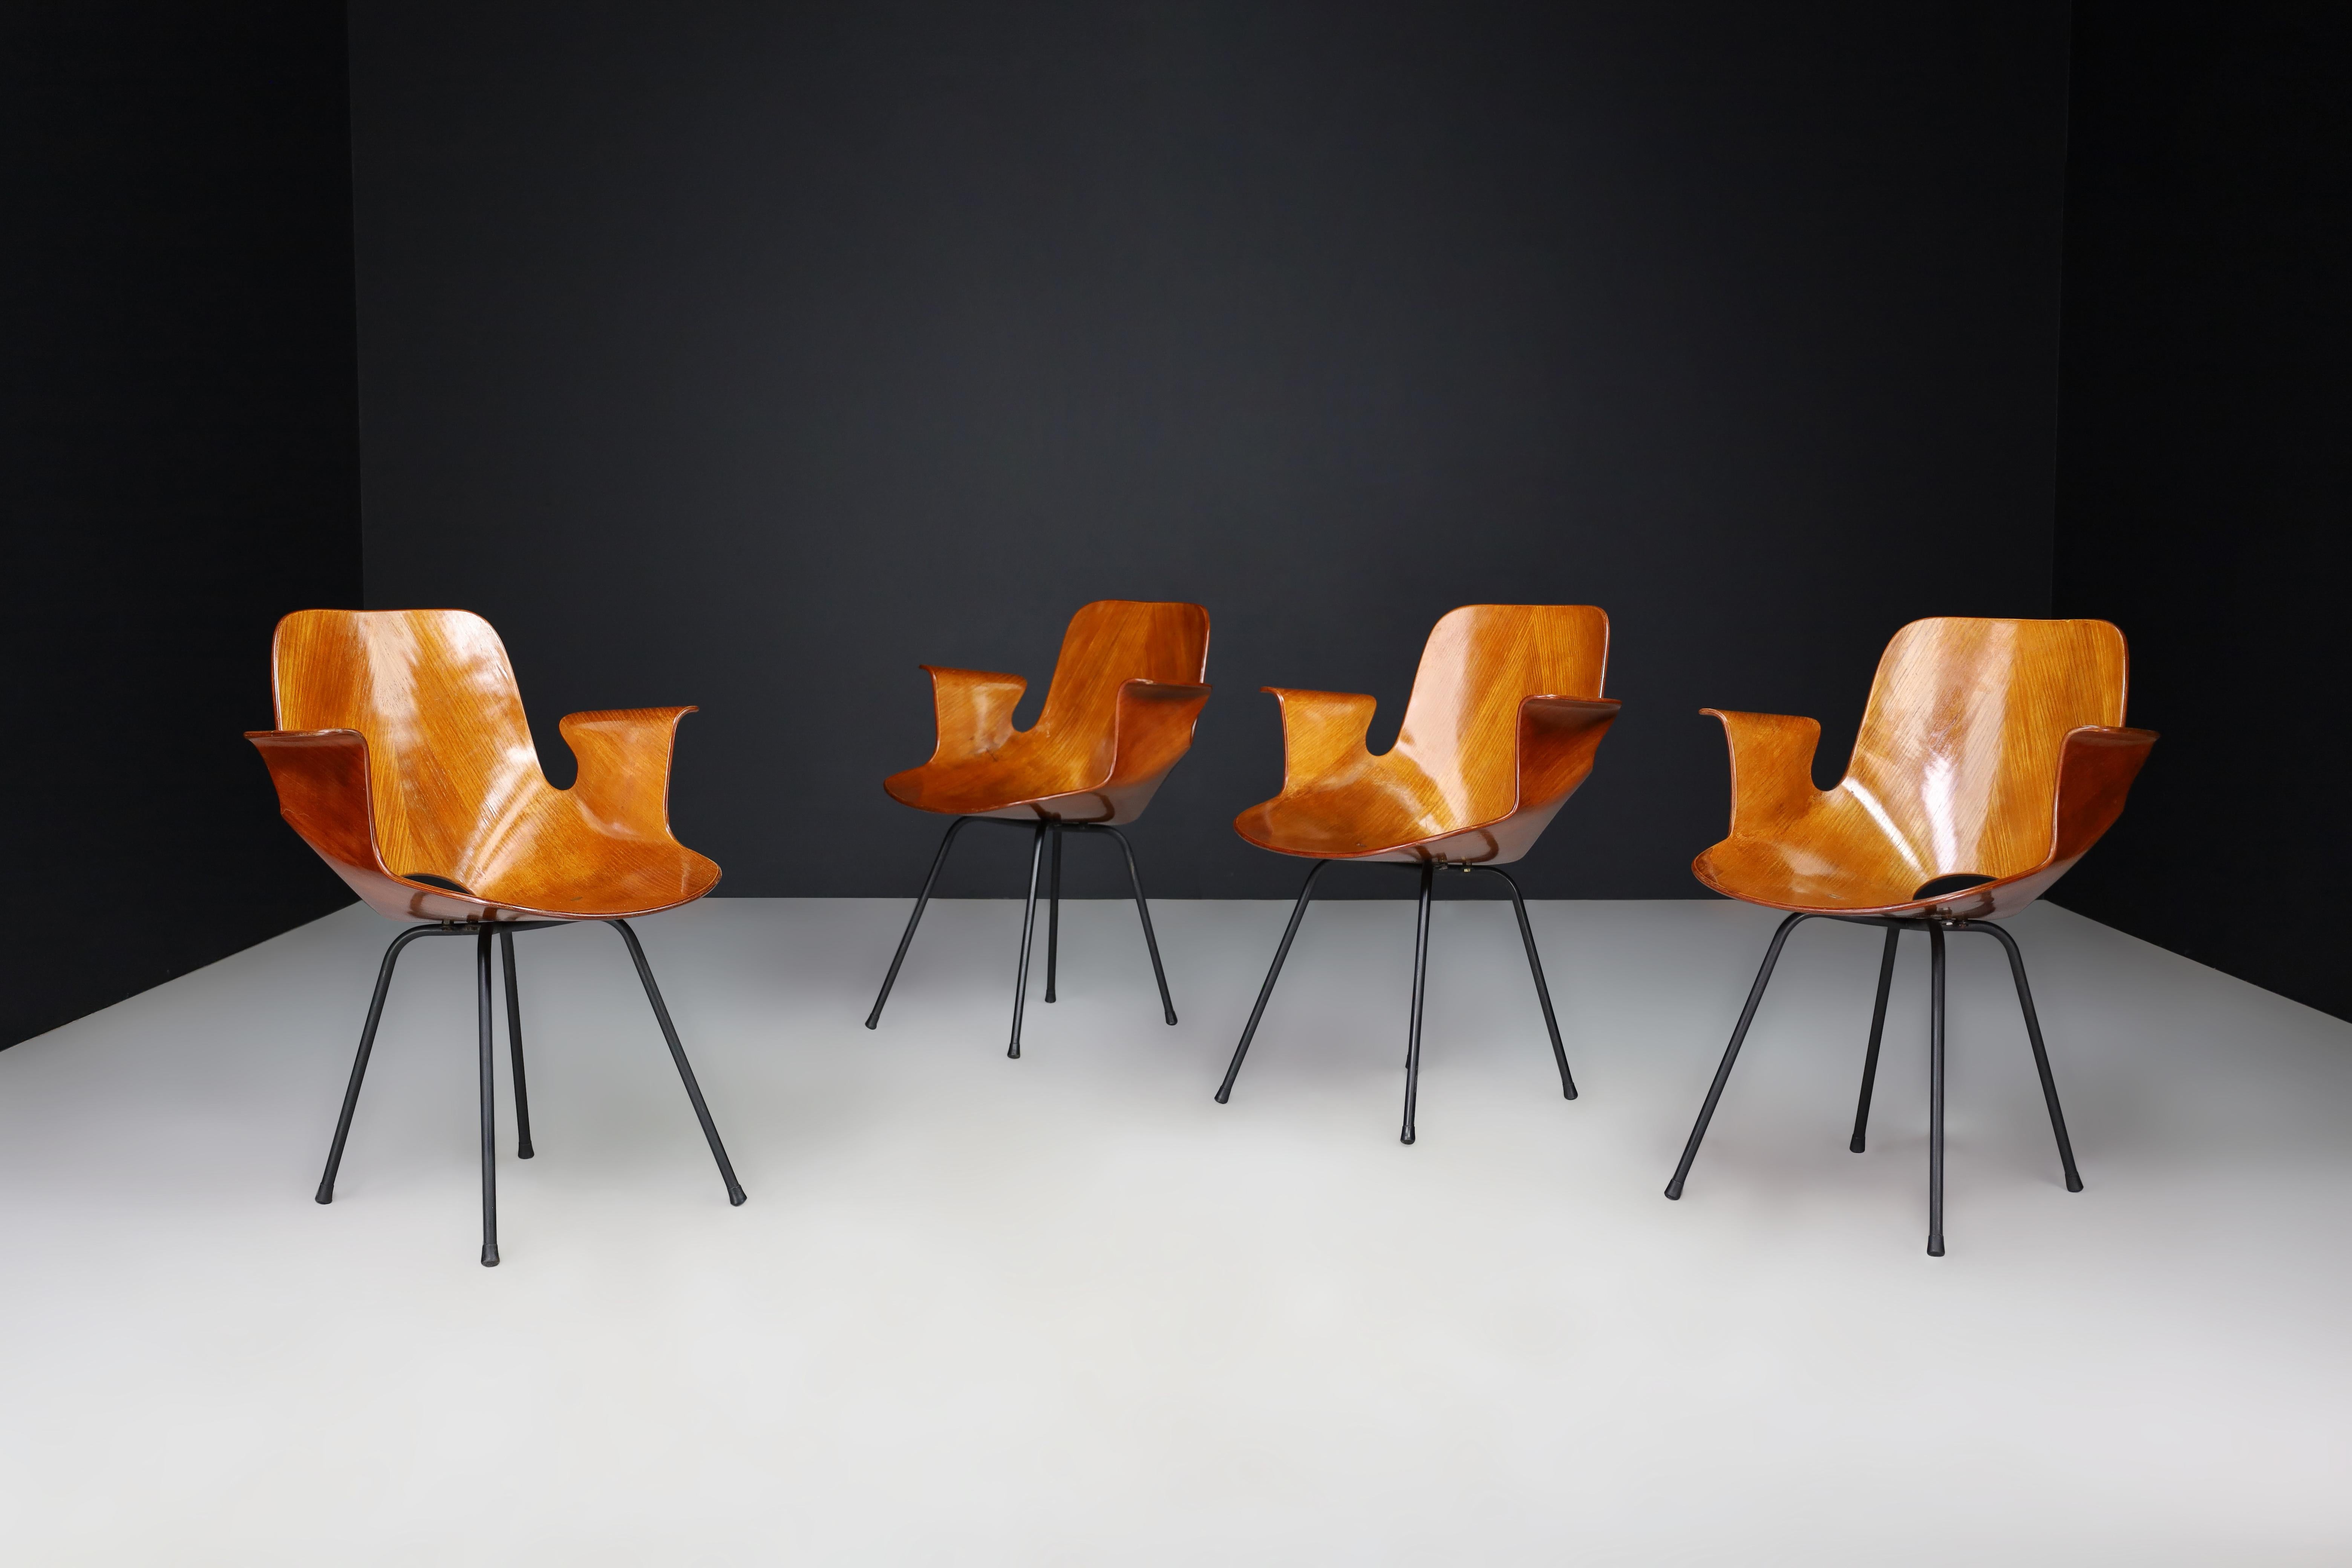 Vittorio Nobili for Fratelli Tagliabue Medea Armchairs, Italy, the 1955s.

These four armchairs of the 